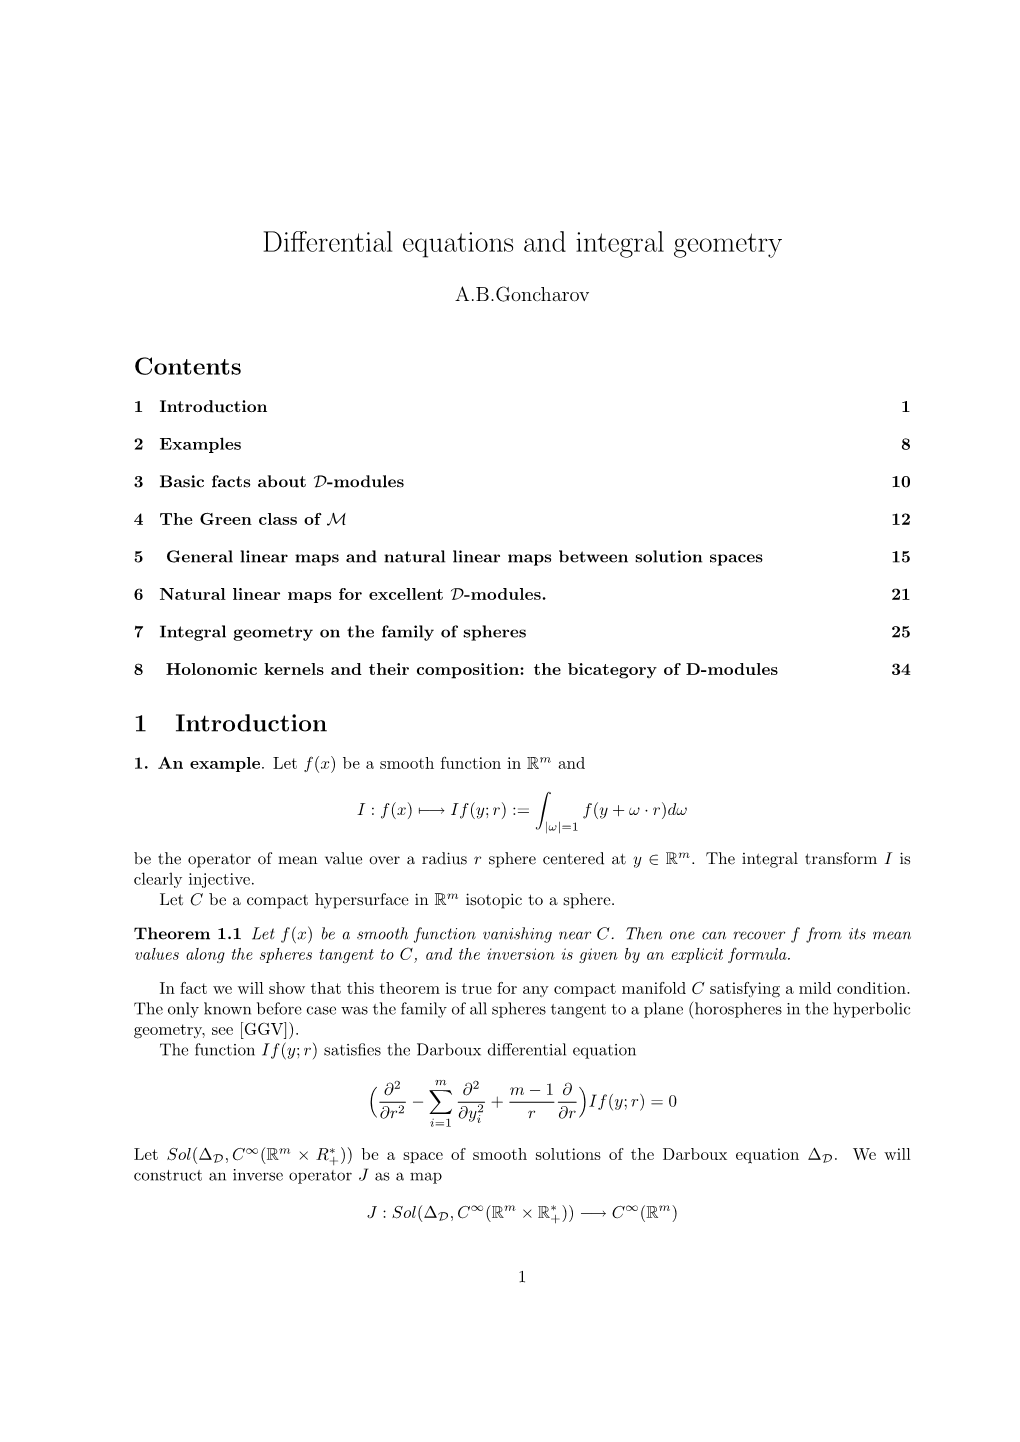 Differential Equations and Integral Geometry